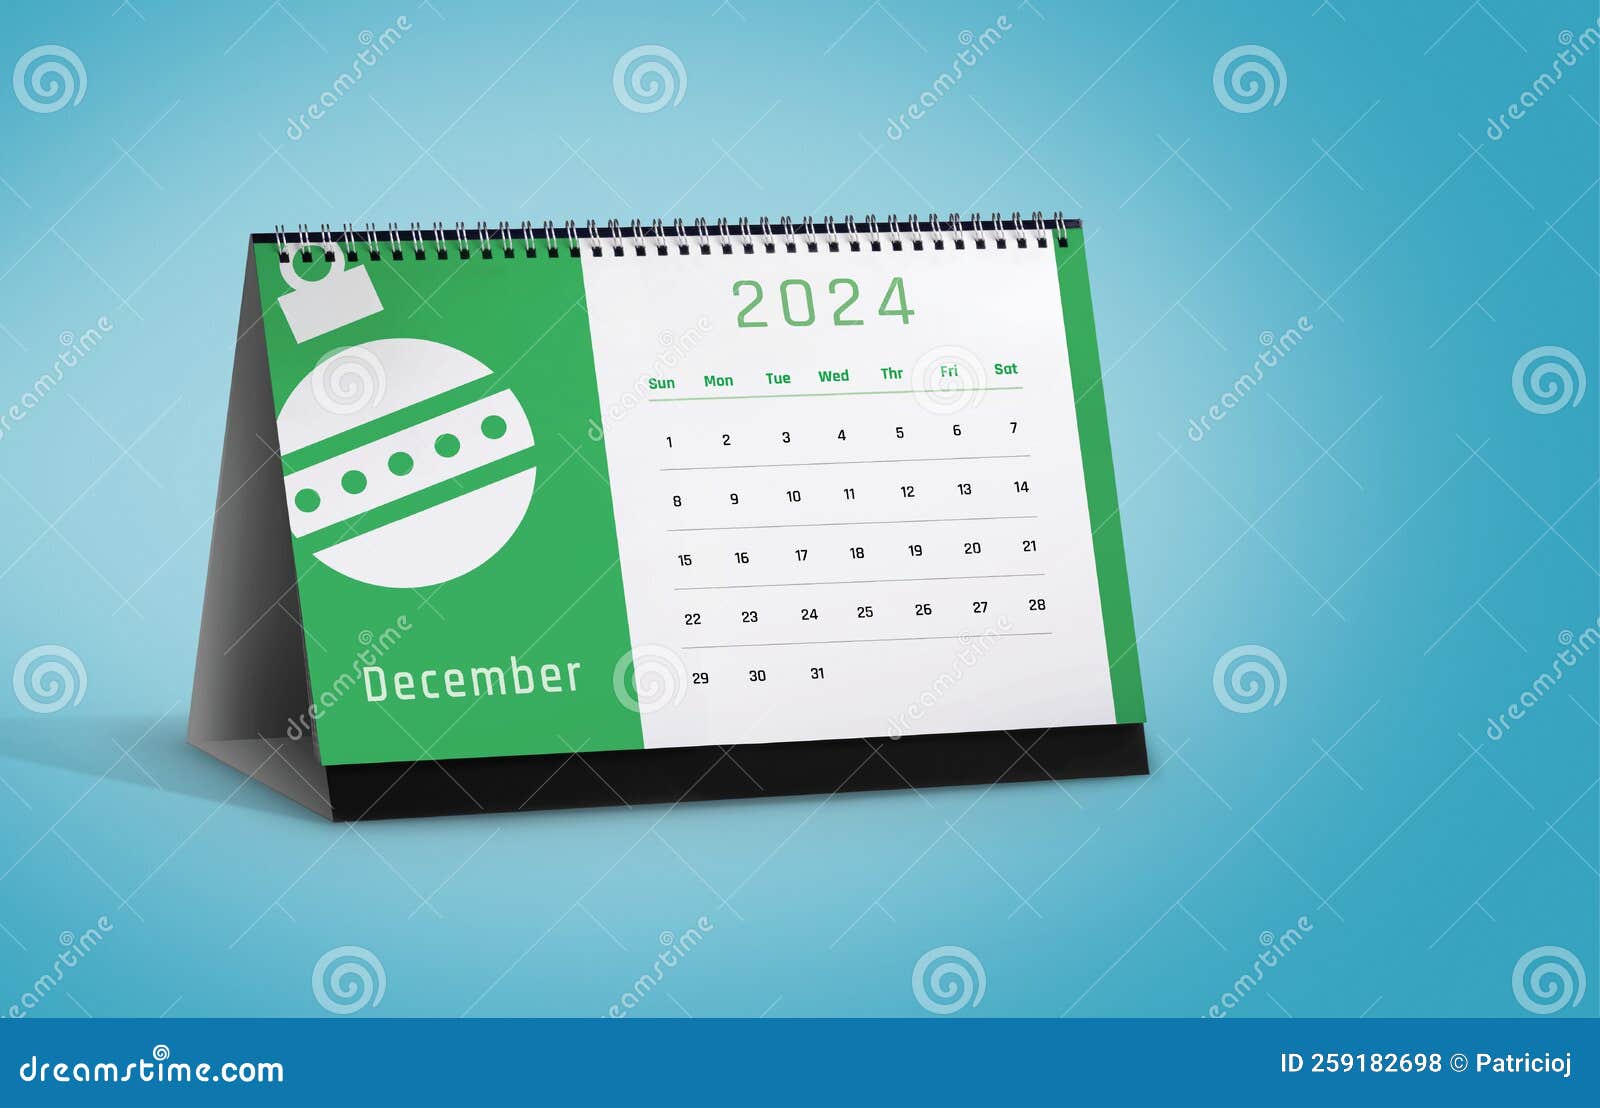 december 2024 calendar with ornament icon  on blue background with space for copy